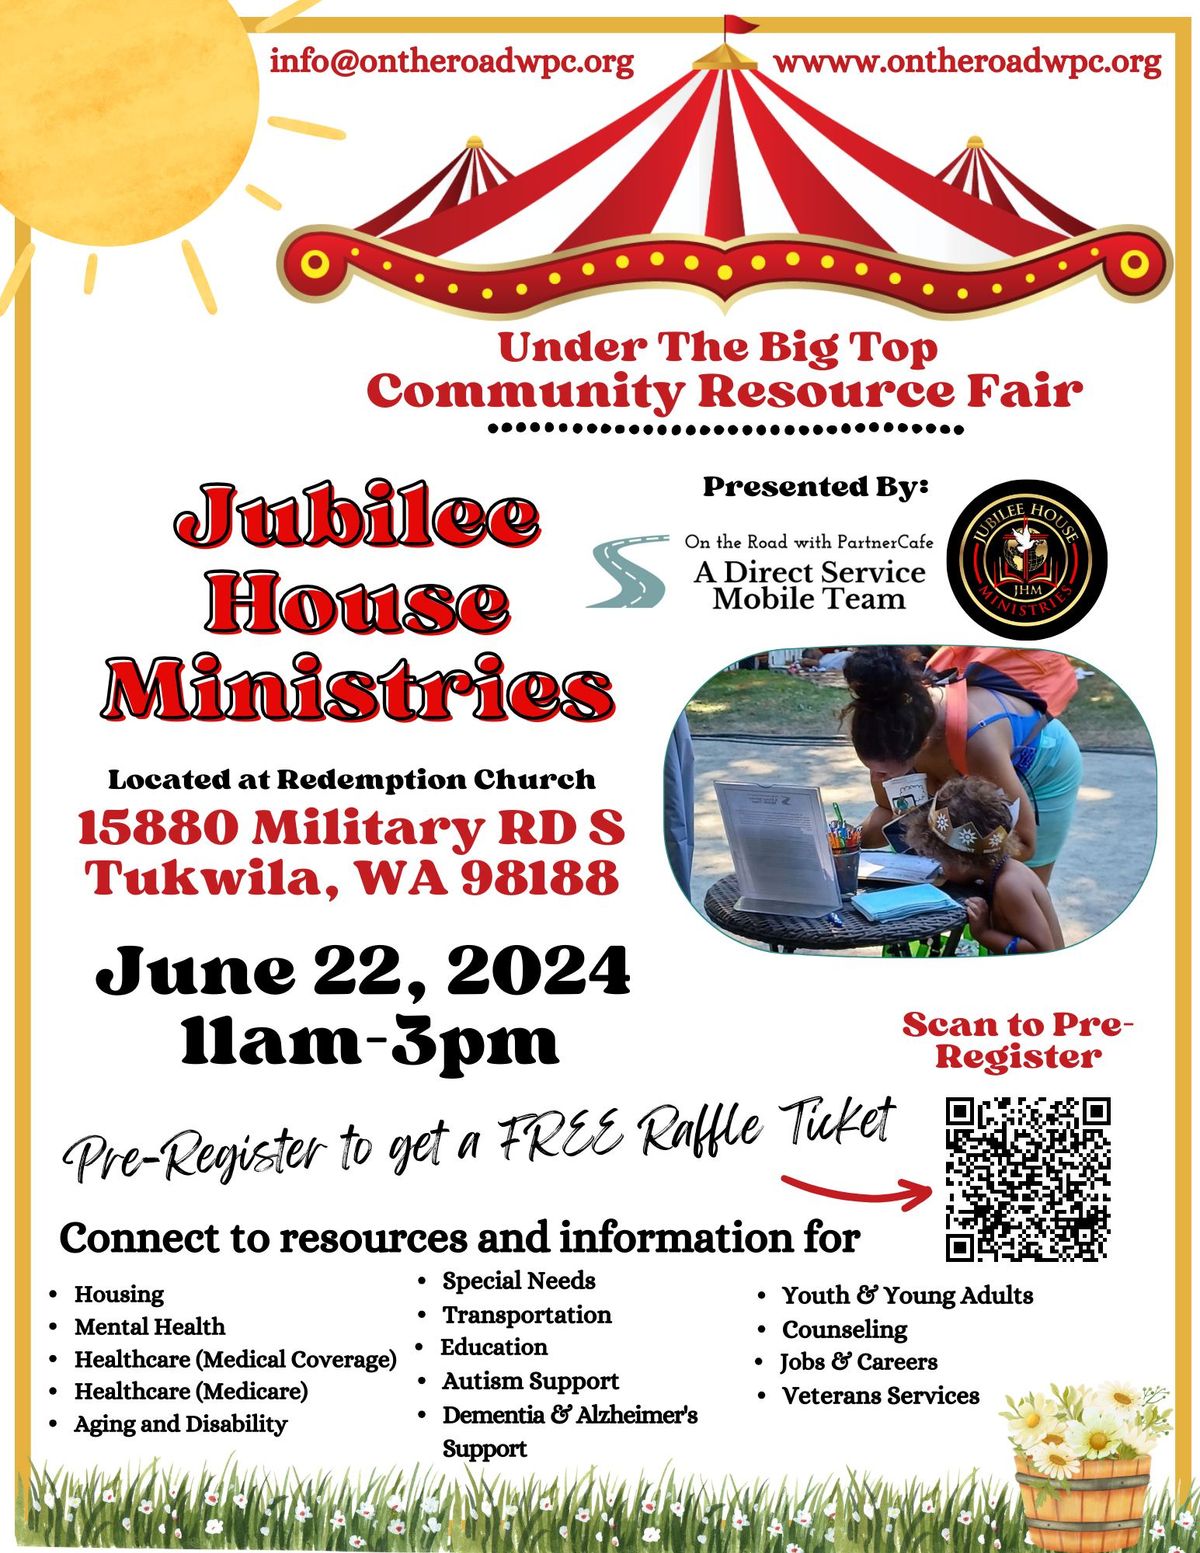 Under The Big Top Community Resource Fair WITH Jubilee House Ministries